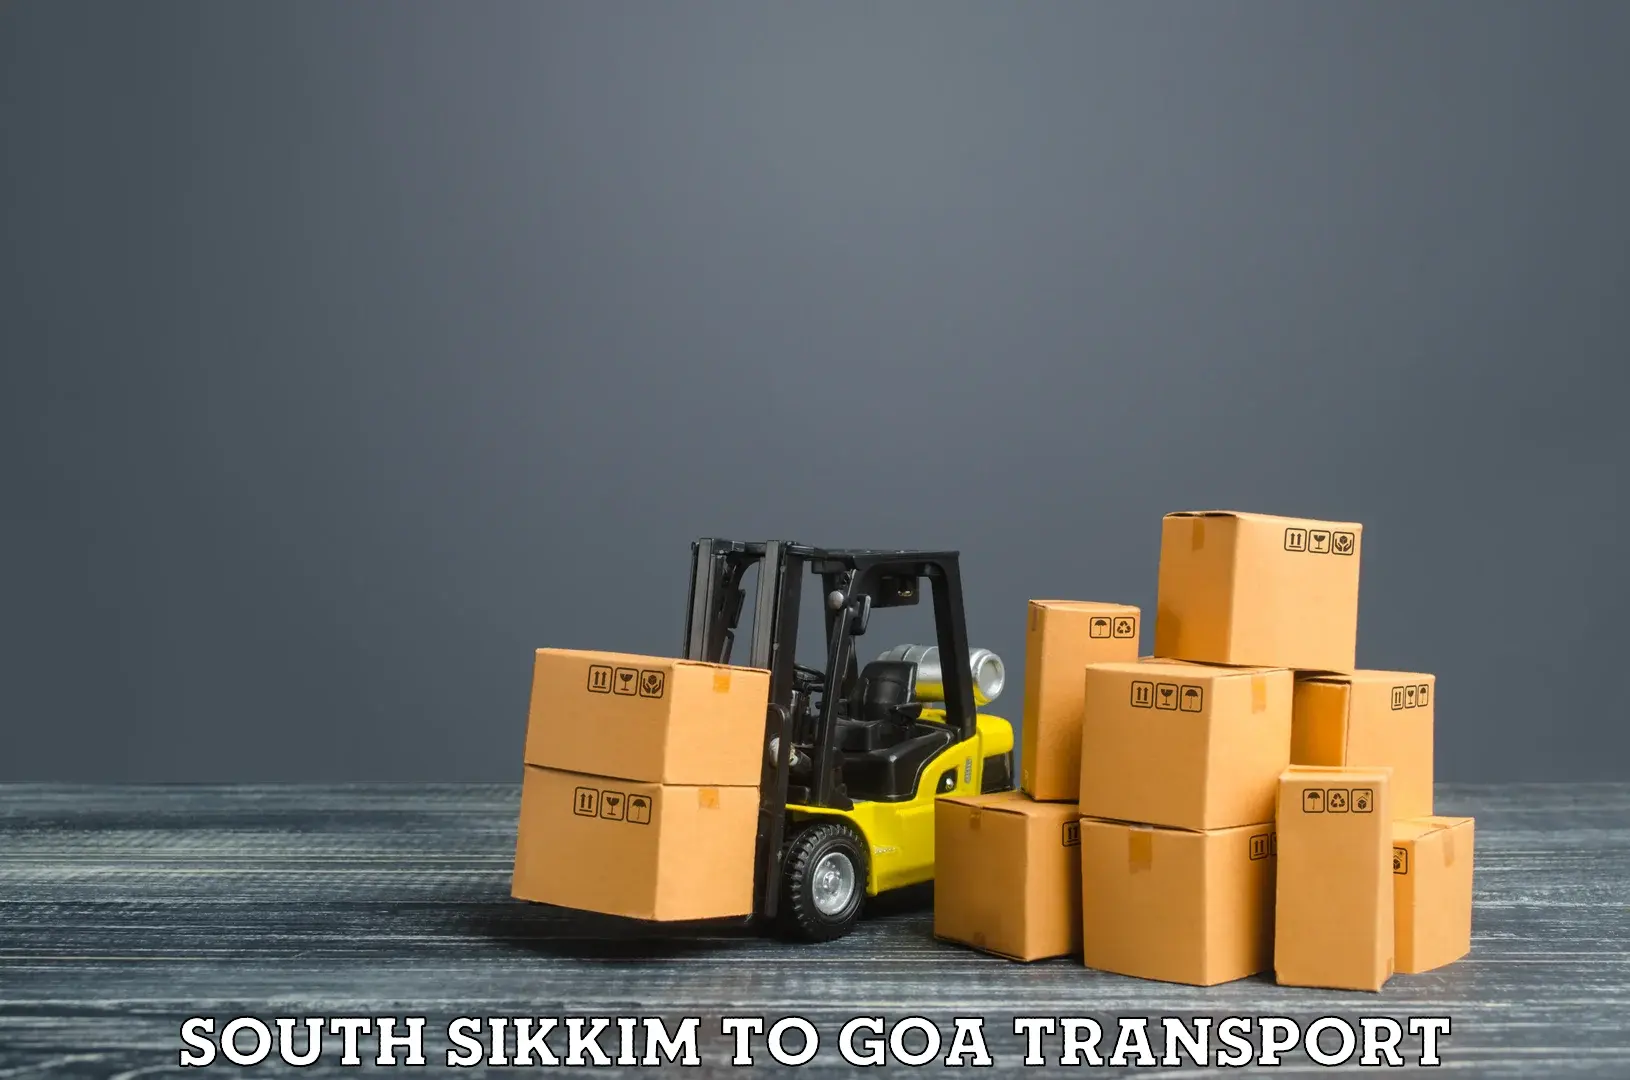 Transport in sharing in South Sikkim to Goa